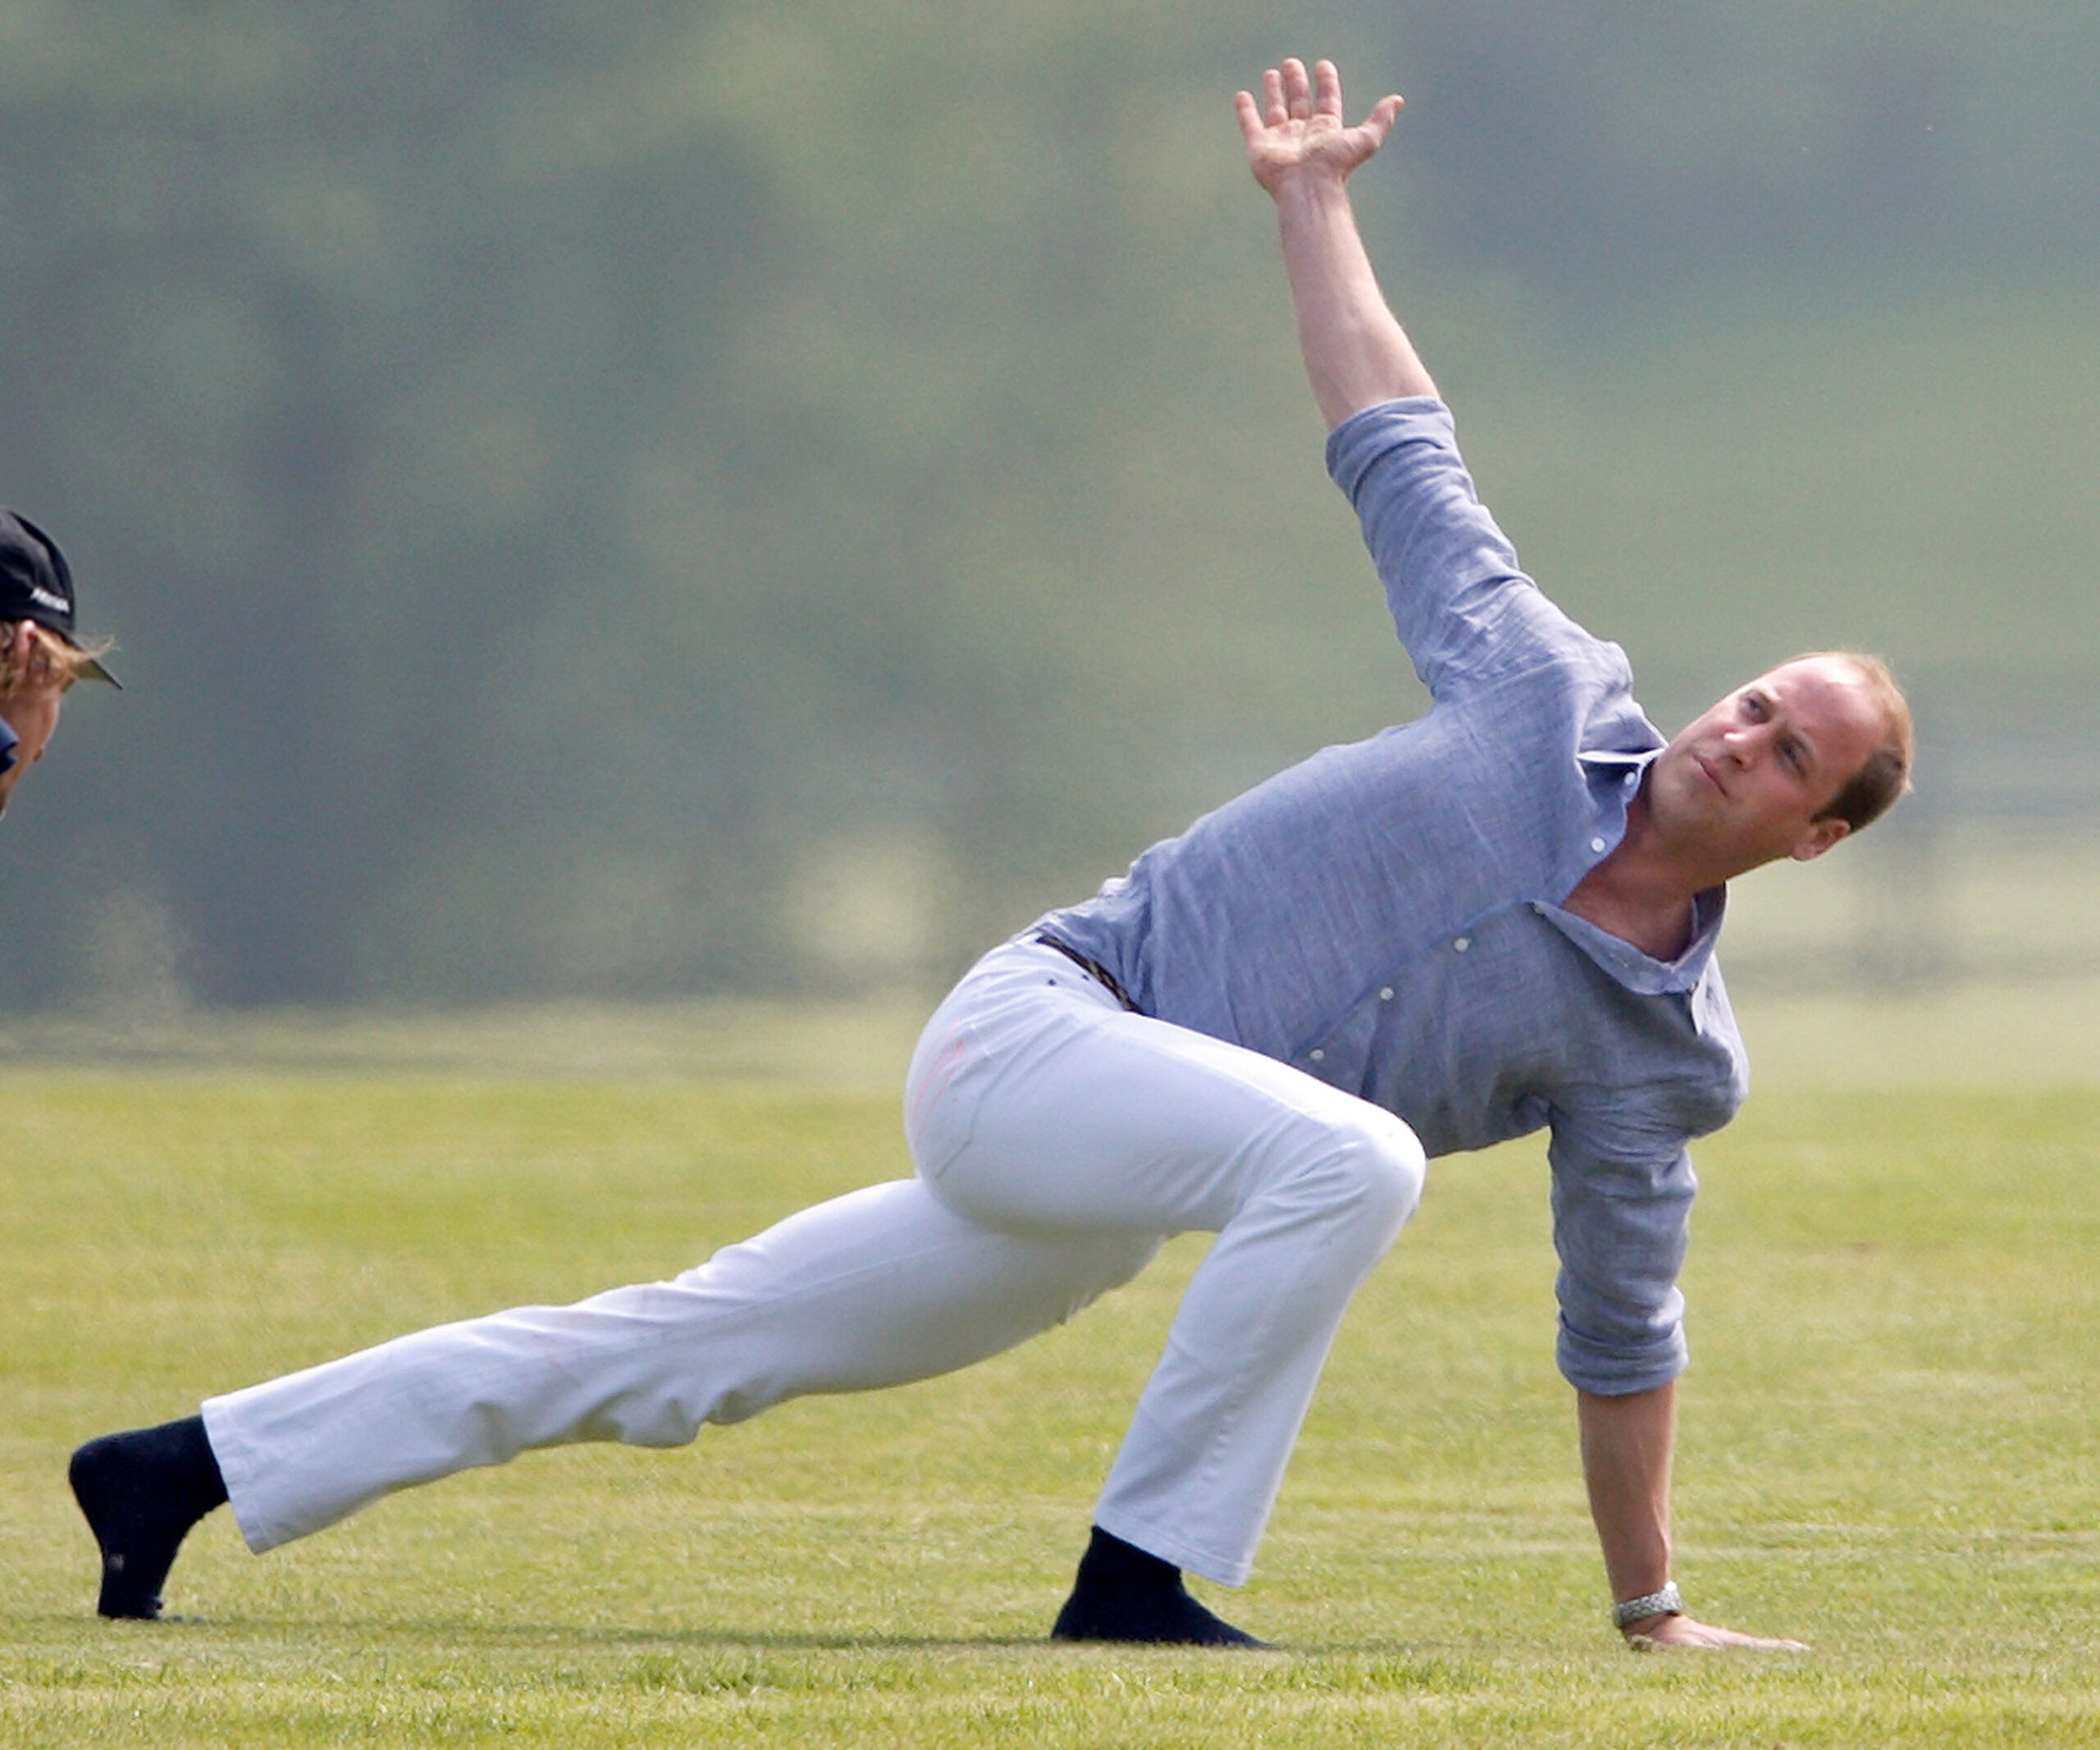 Prince William does yoga in white jeans